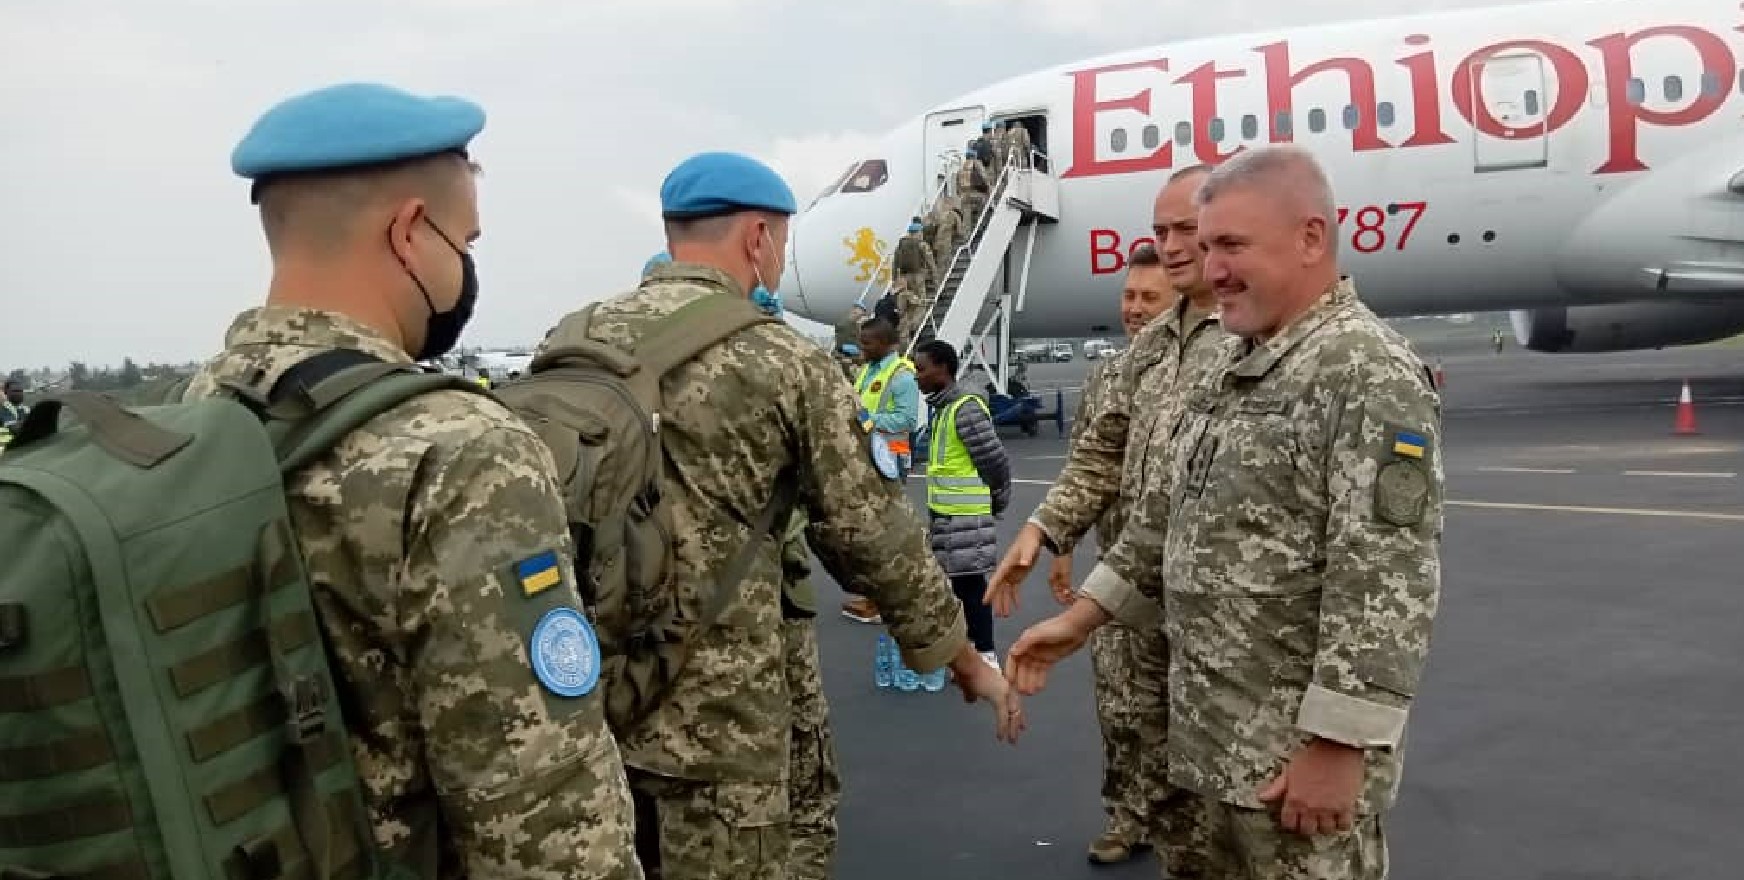 Ukraine withdrew from the UN mission in the Democratic Republic of the Congo